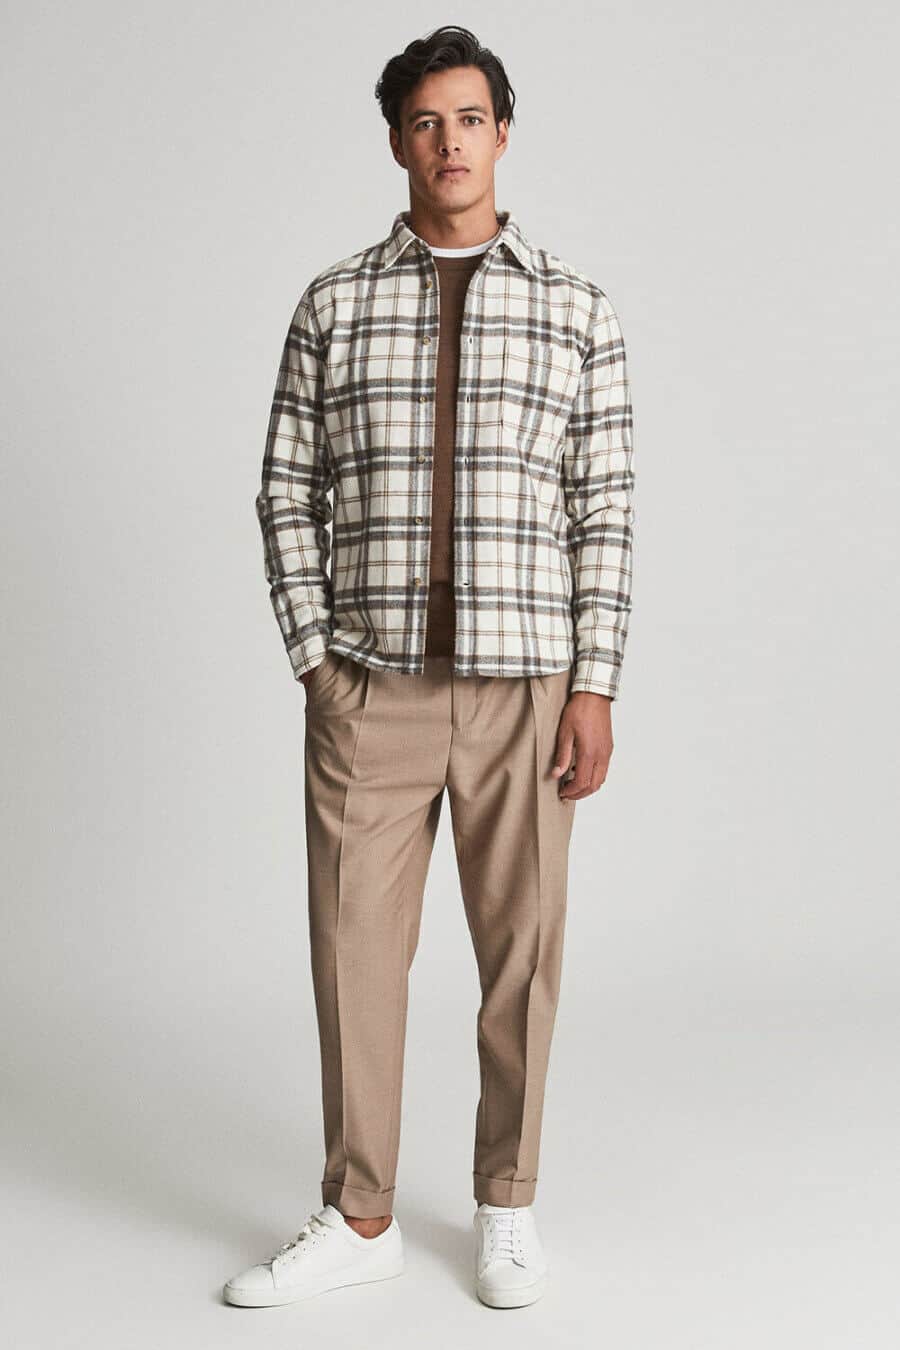 Men's smart casual flannel shirt outfit with khaki chinos and white sneakers